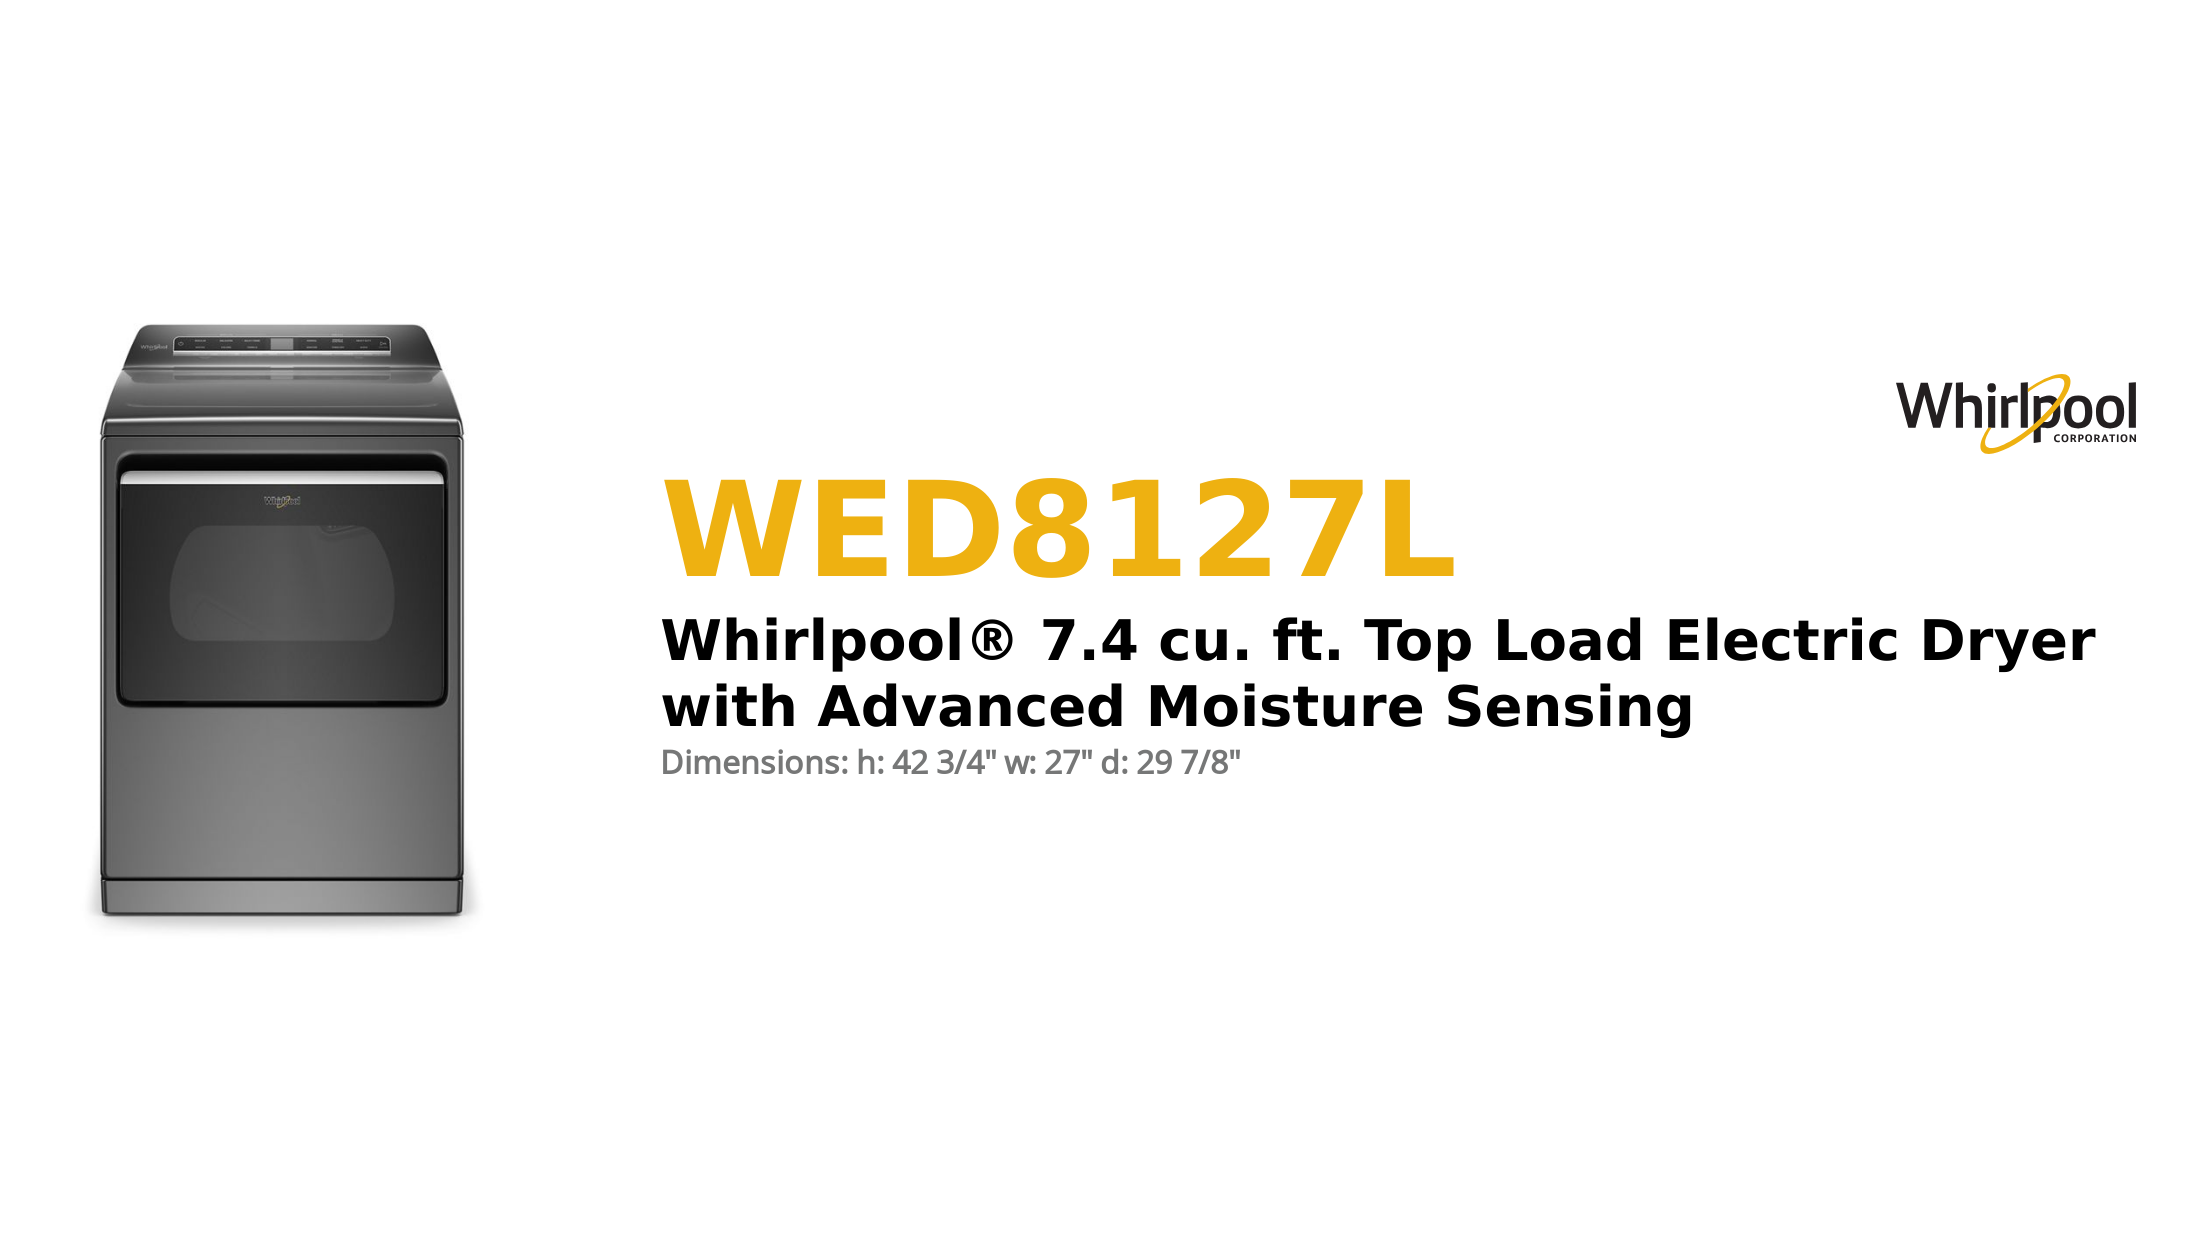 Whirlpool® 7.4 cu. ft. Top Load Electric Dryer with Advanced Moisture Sensing